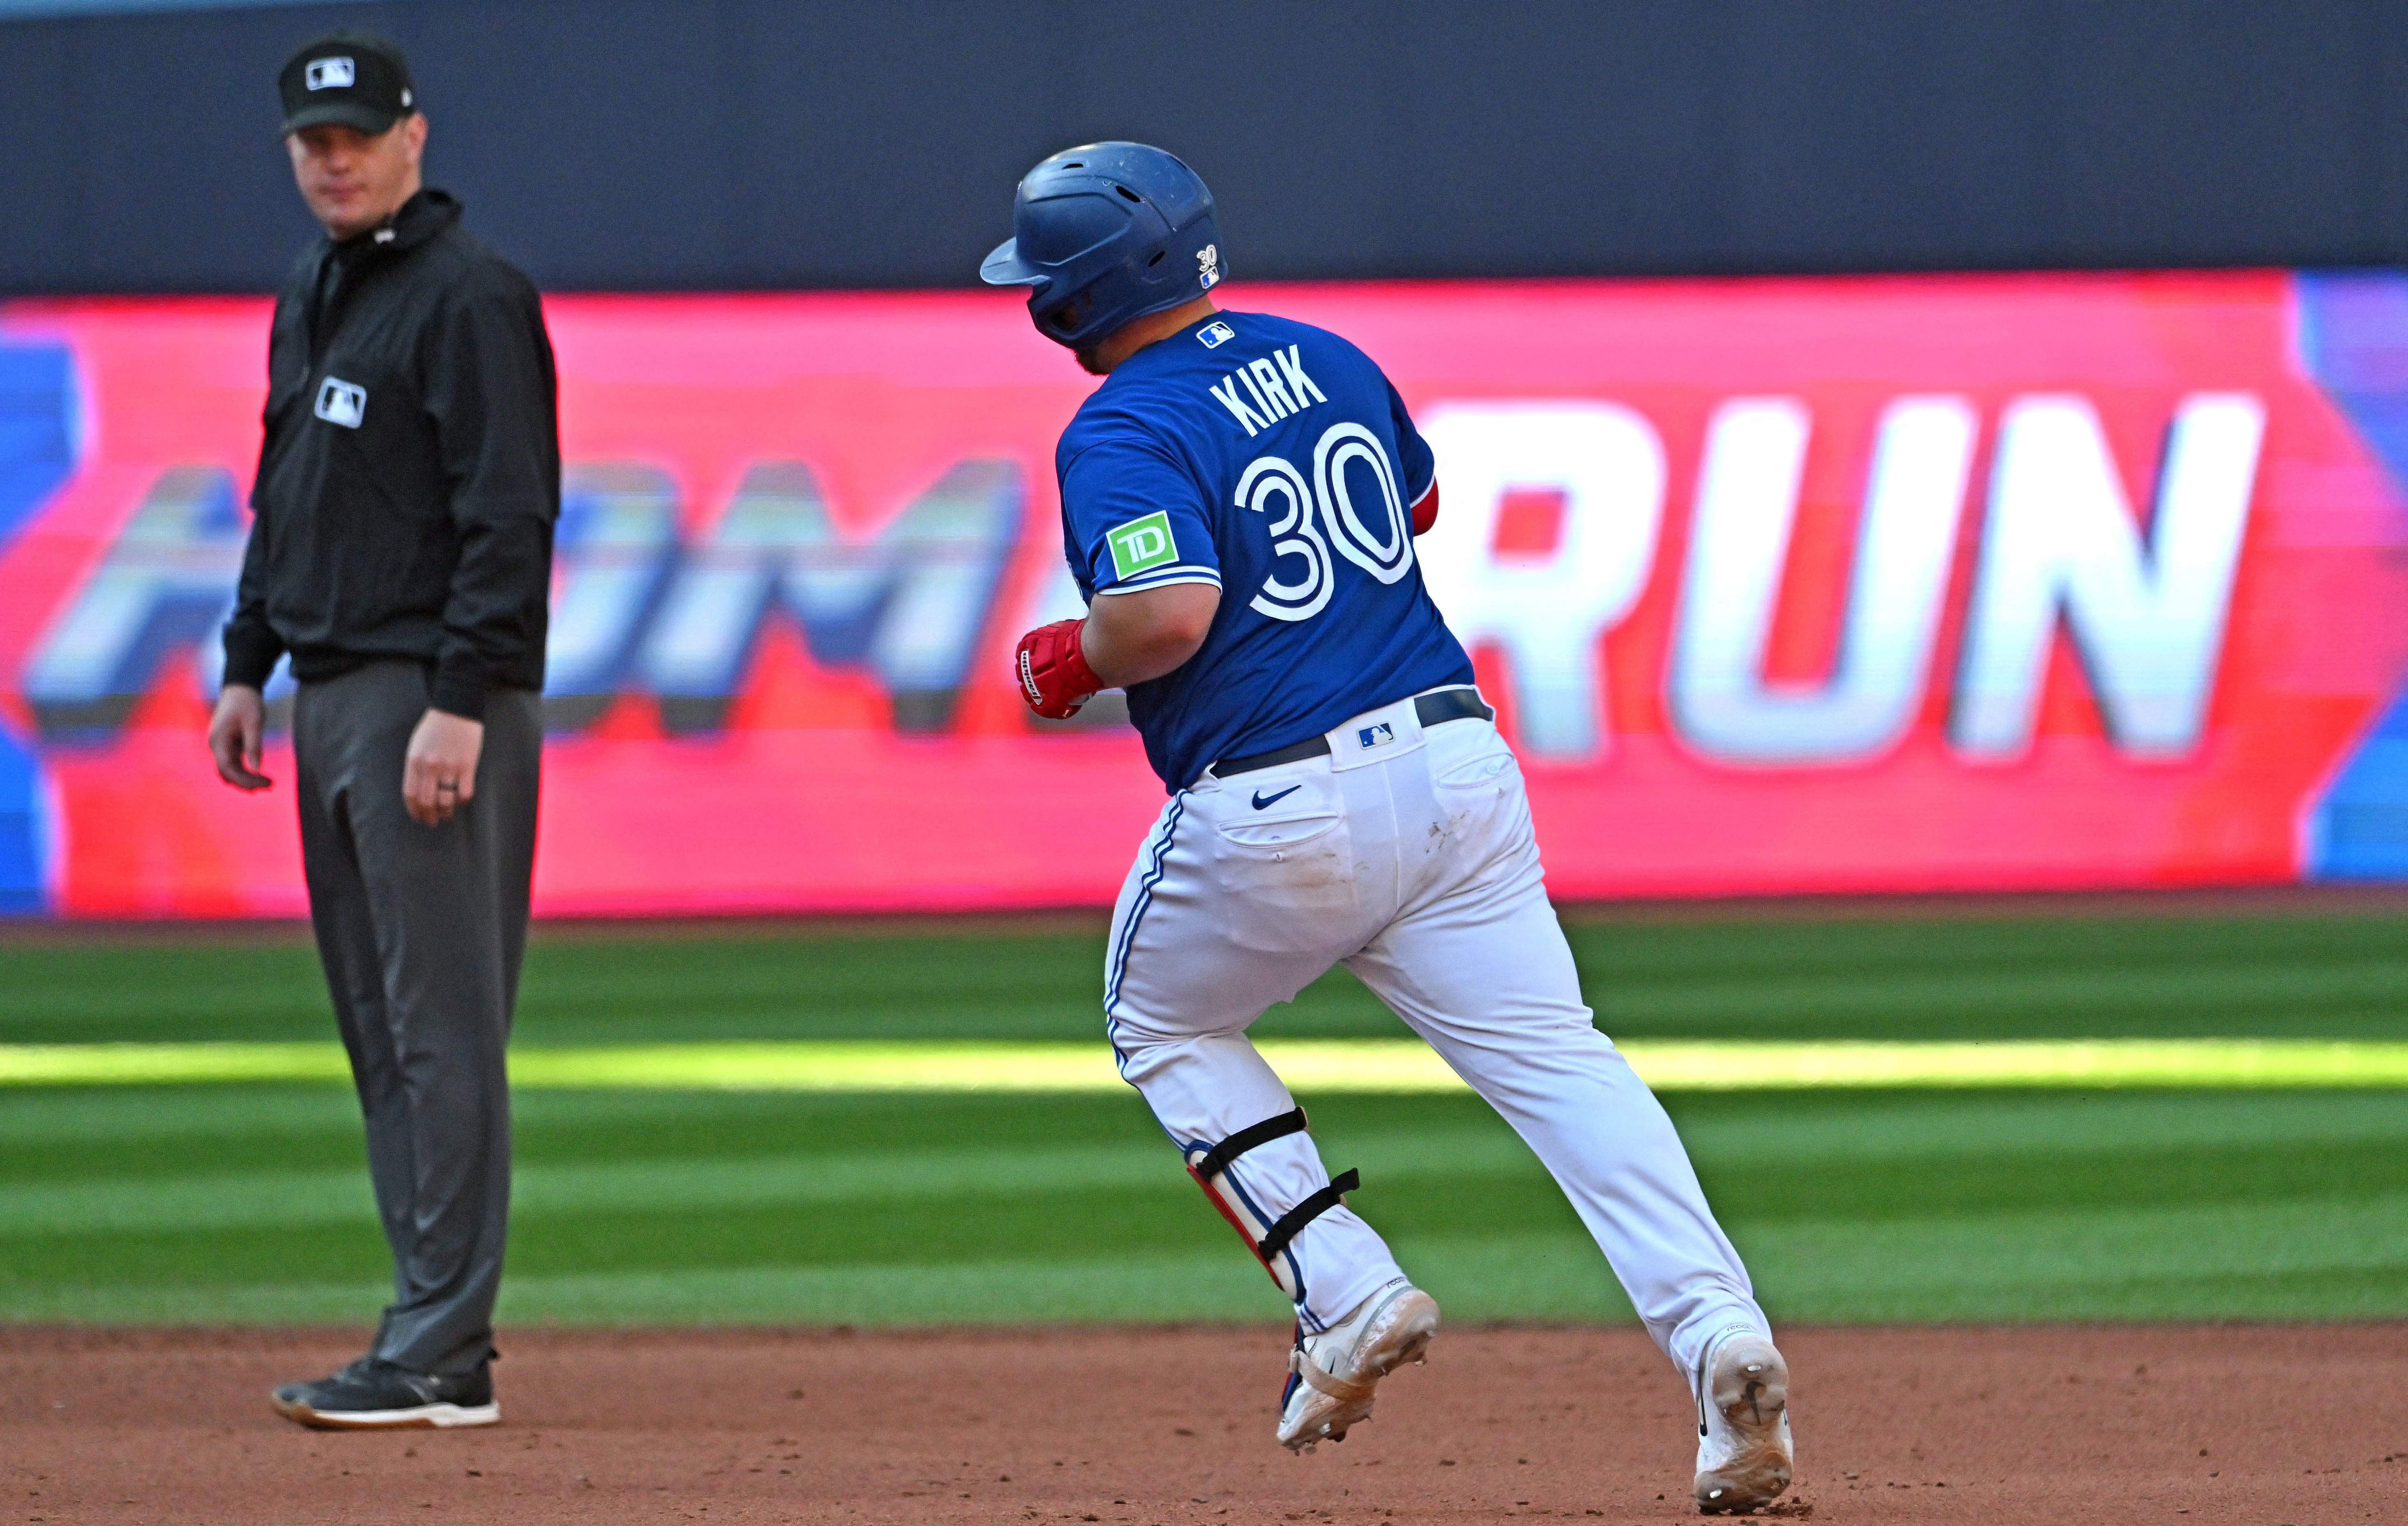 Kirk hits 2 home runs, Espinal also homers as Blue Jays control